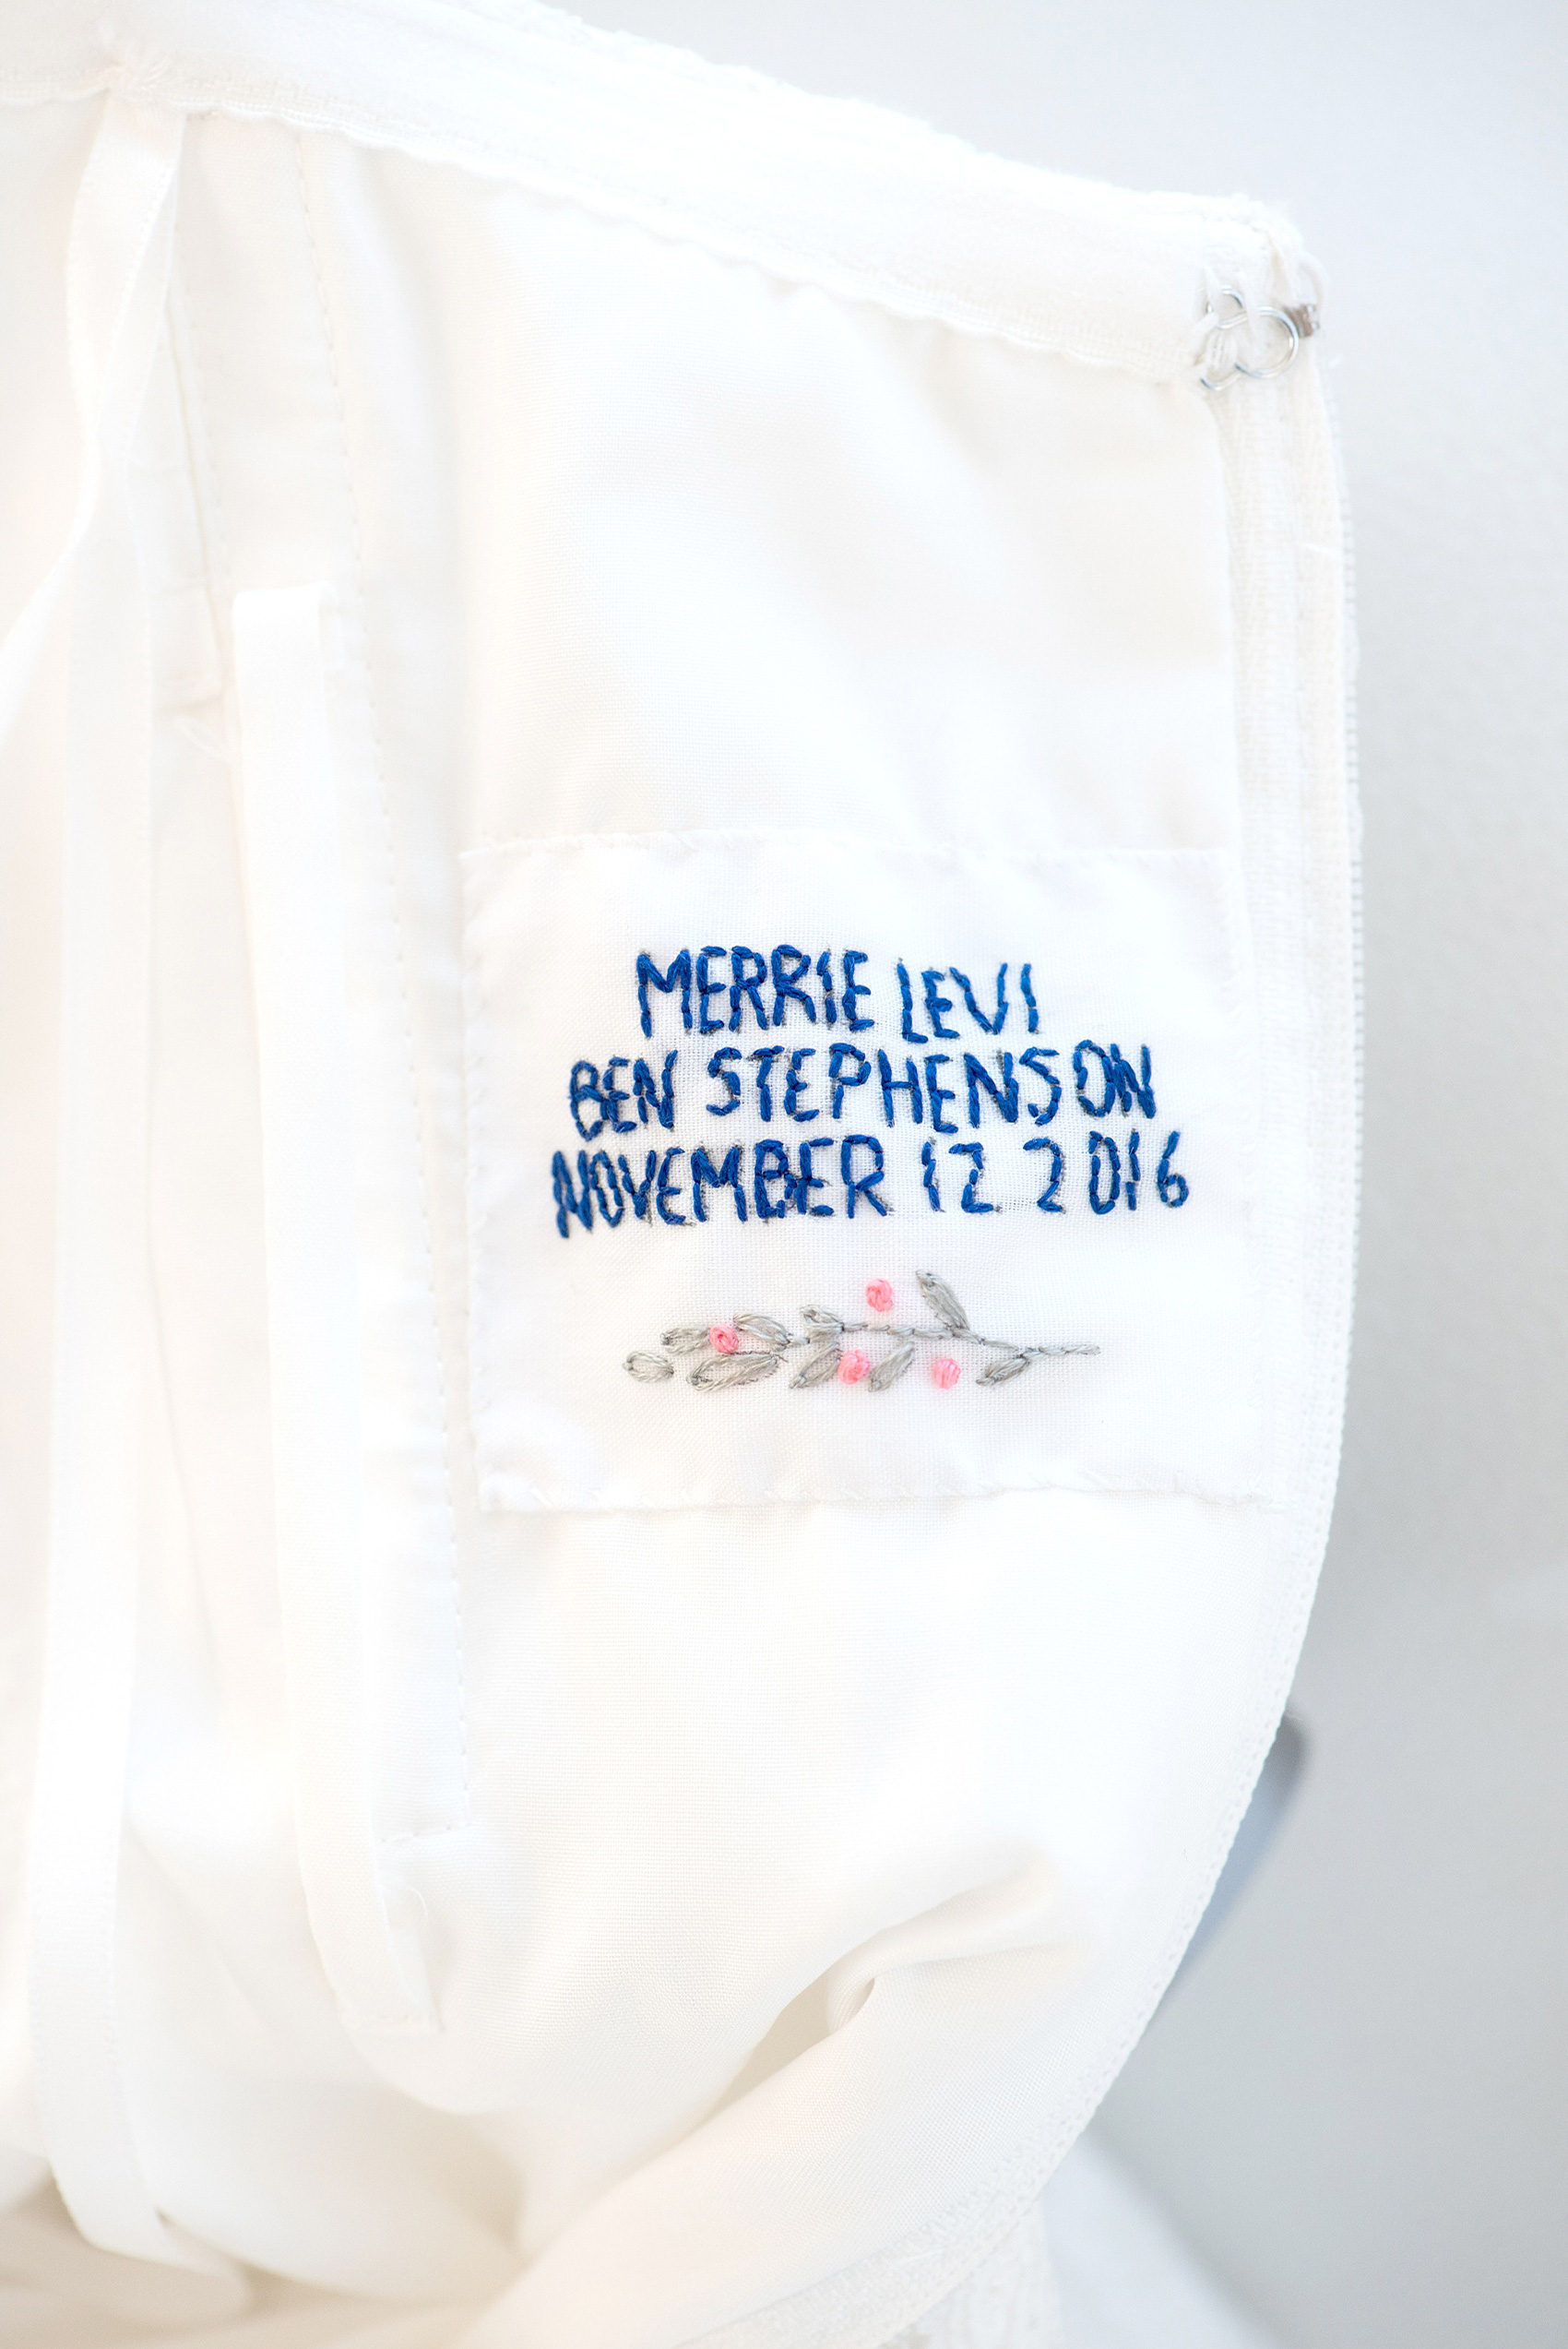 Mikkel Paige Photography photos from a wedding at The Glass Box and Stockroom at 230 in Raleigh. A detail image of the custom embroidered tag the bride's mother created for her daughter's wedding gown with the couple's date and names on it.